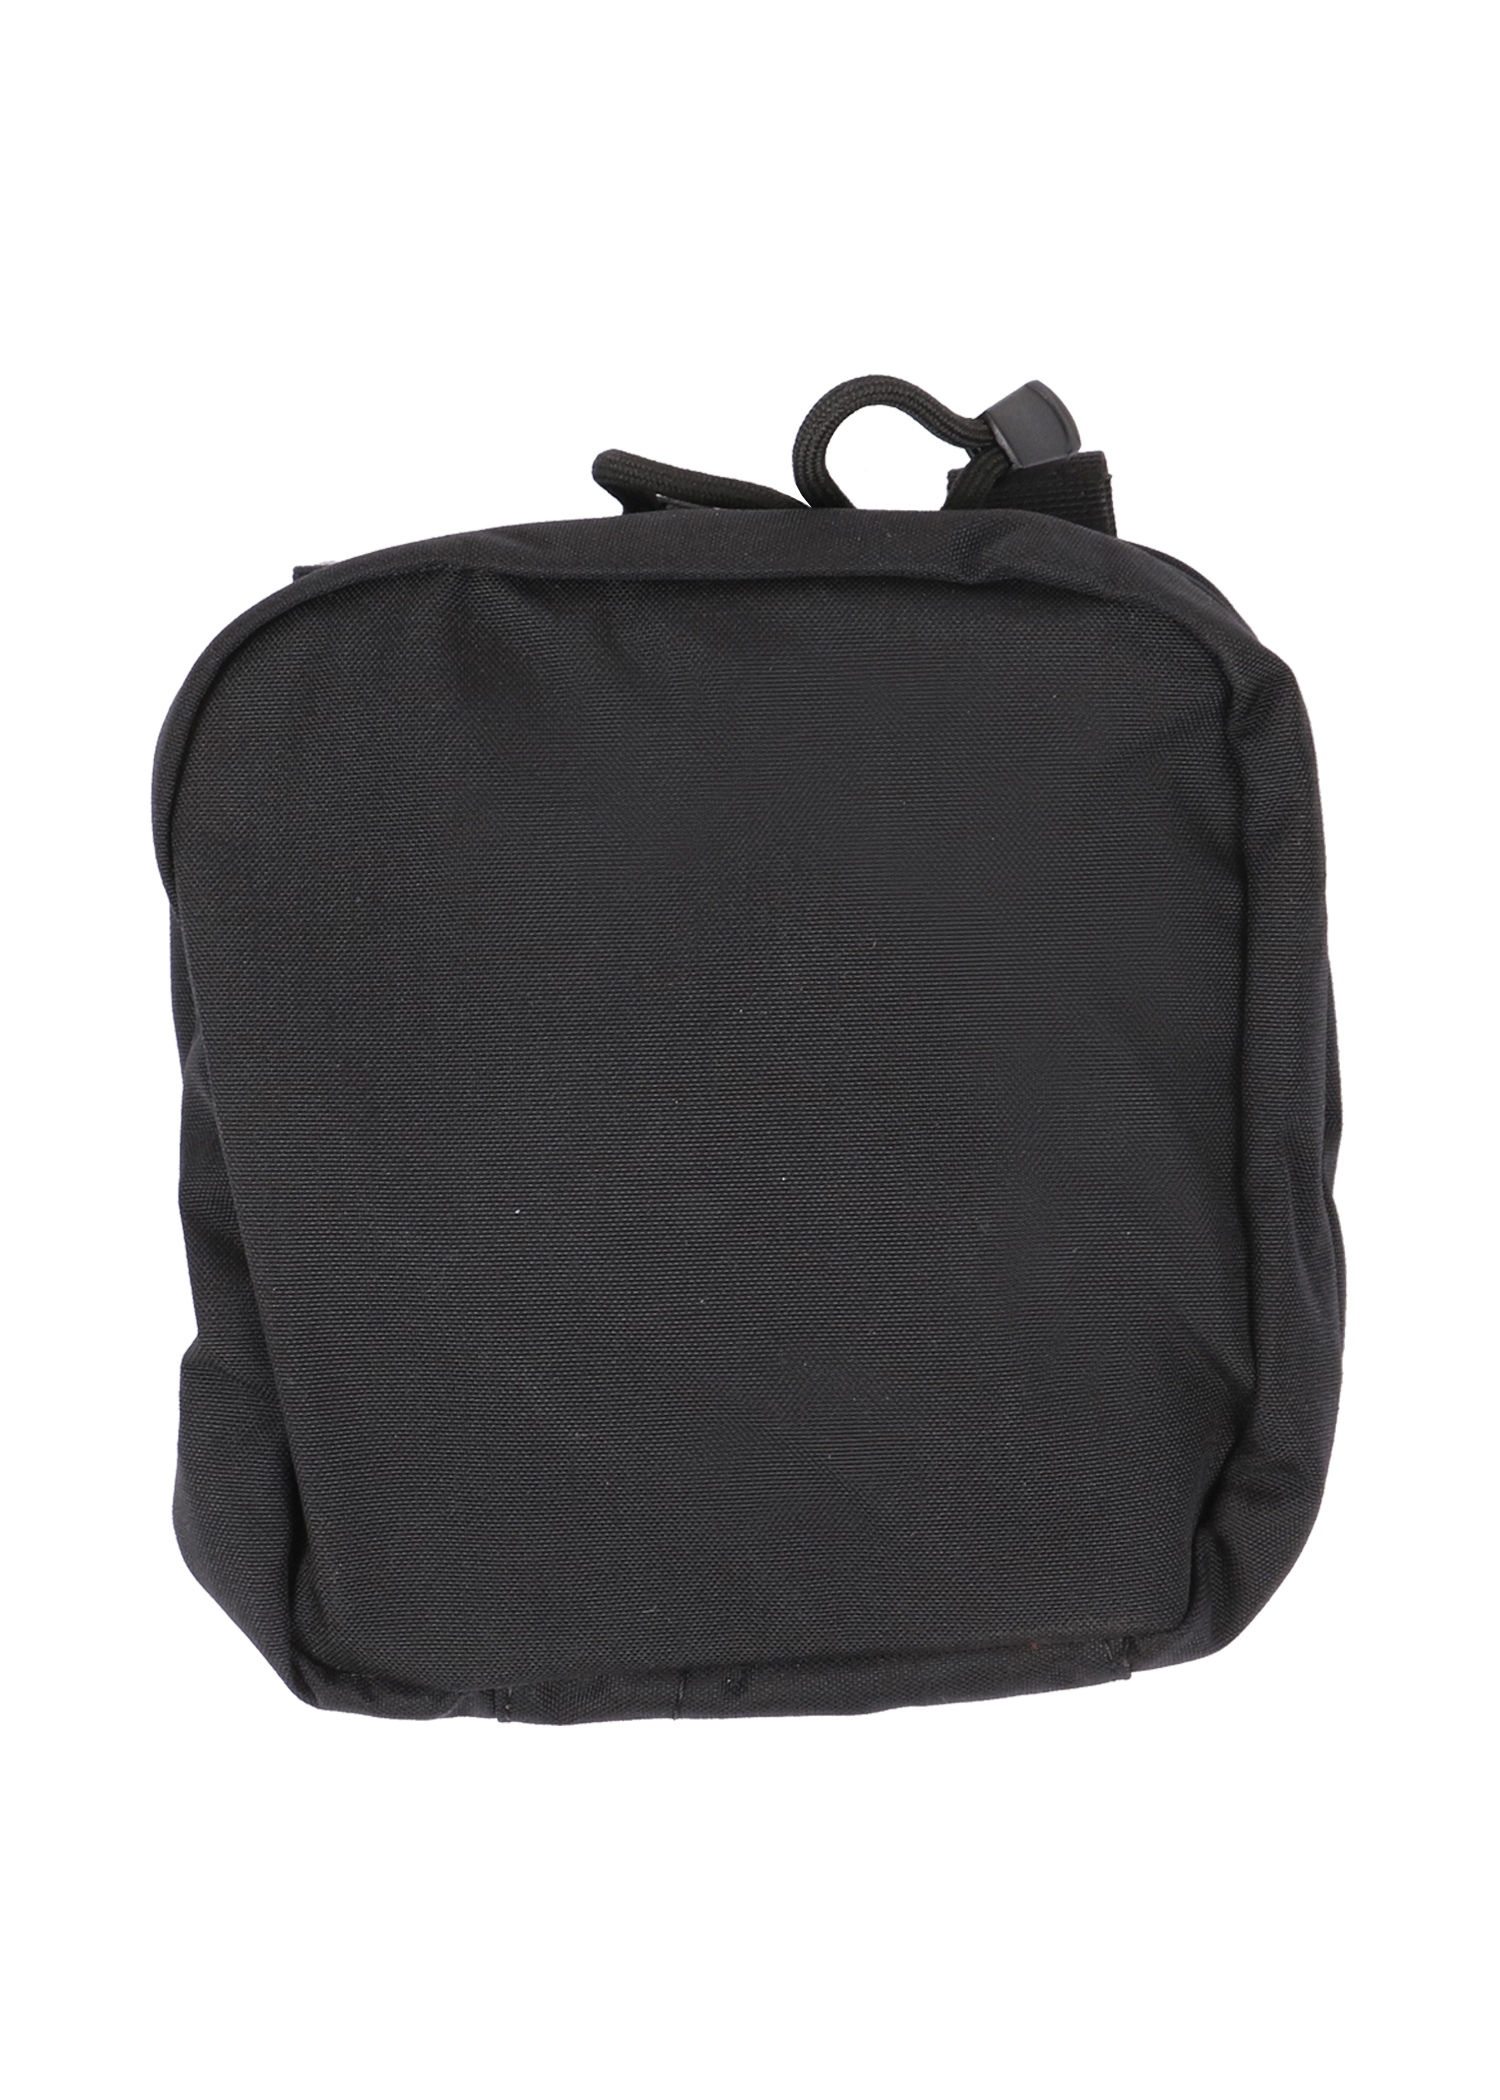 Allrounder Pouch